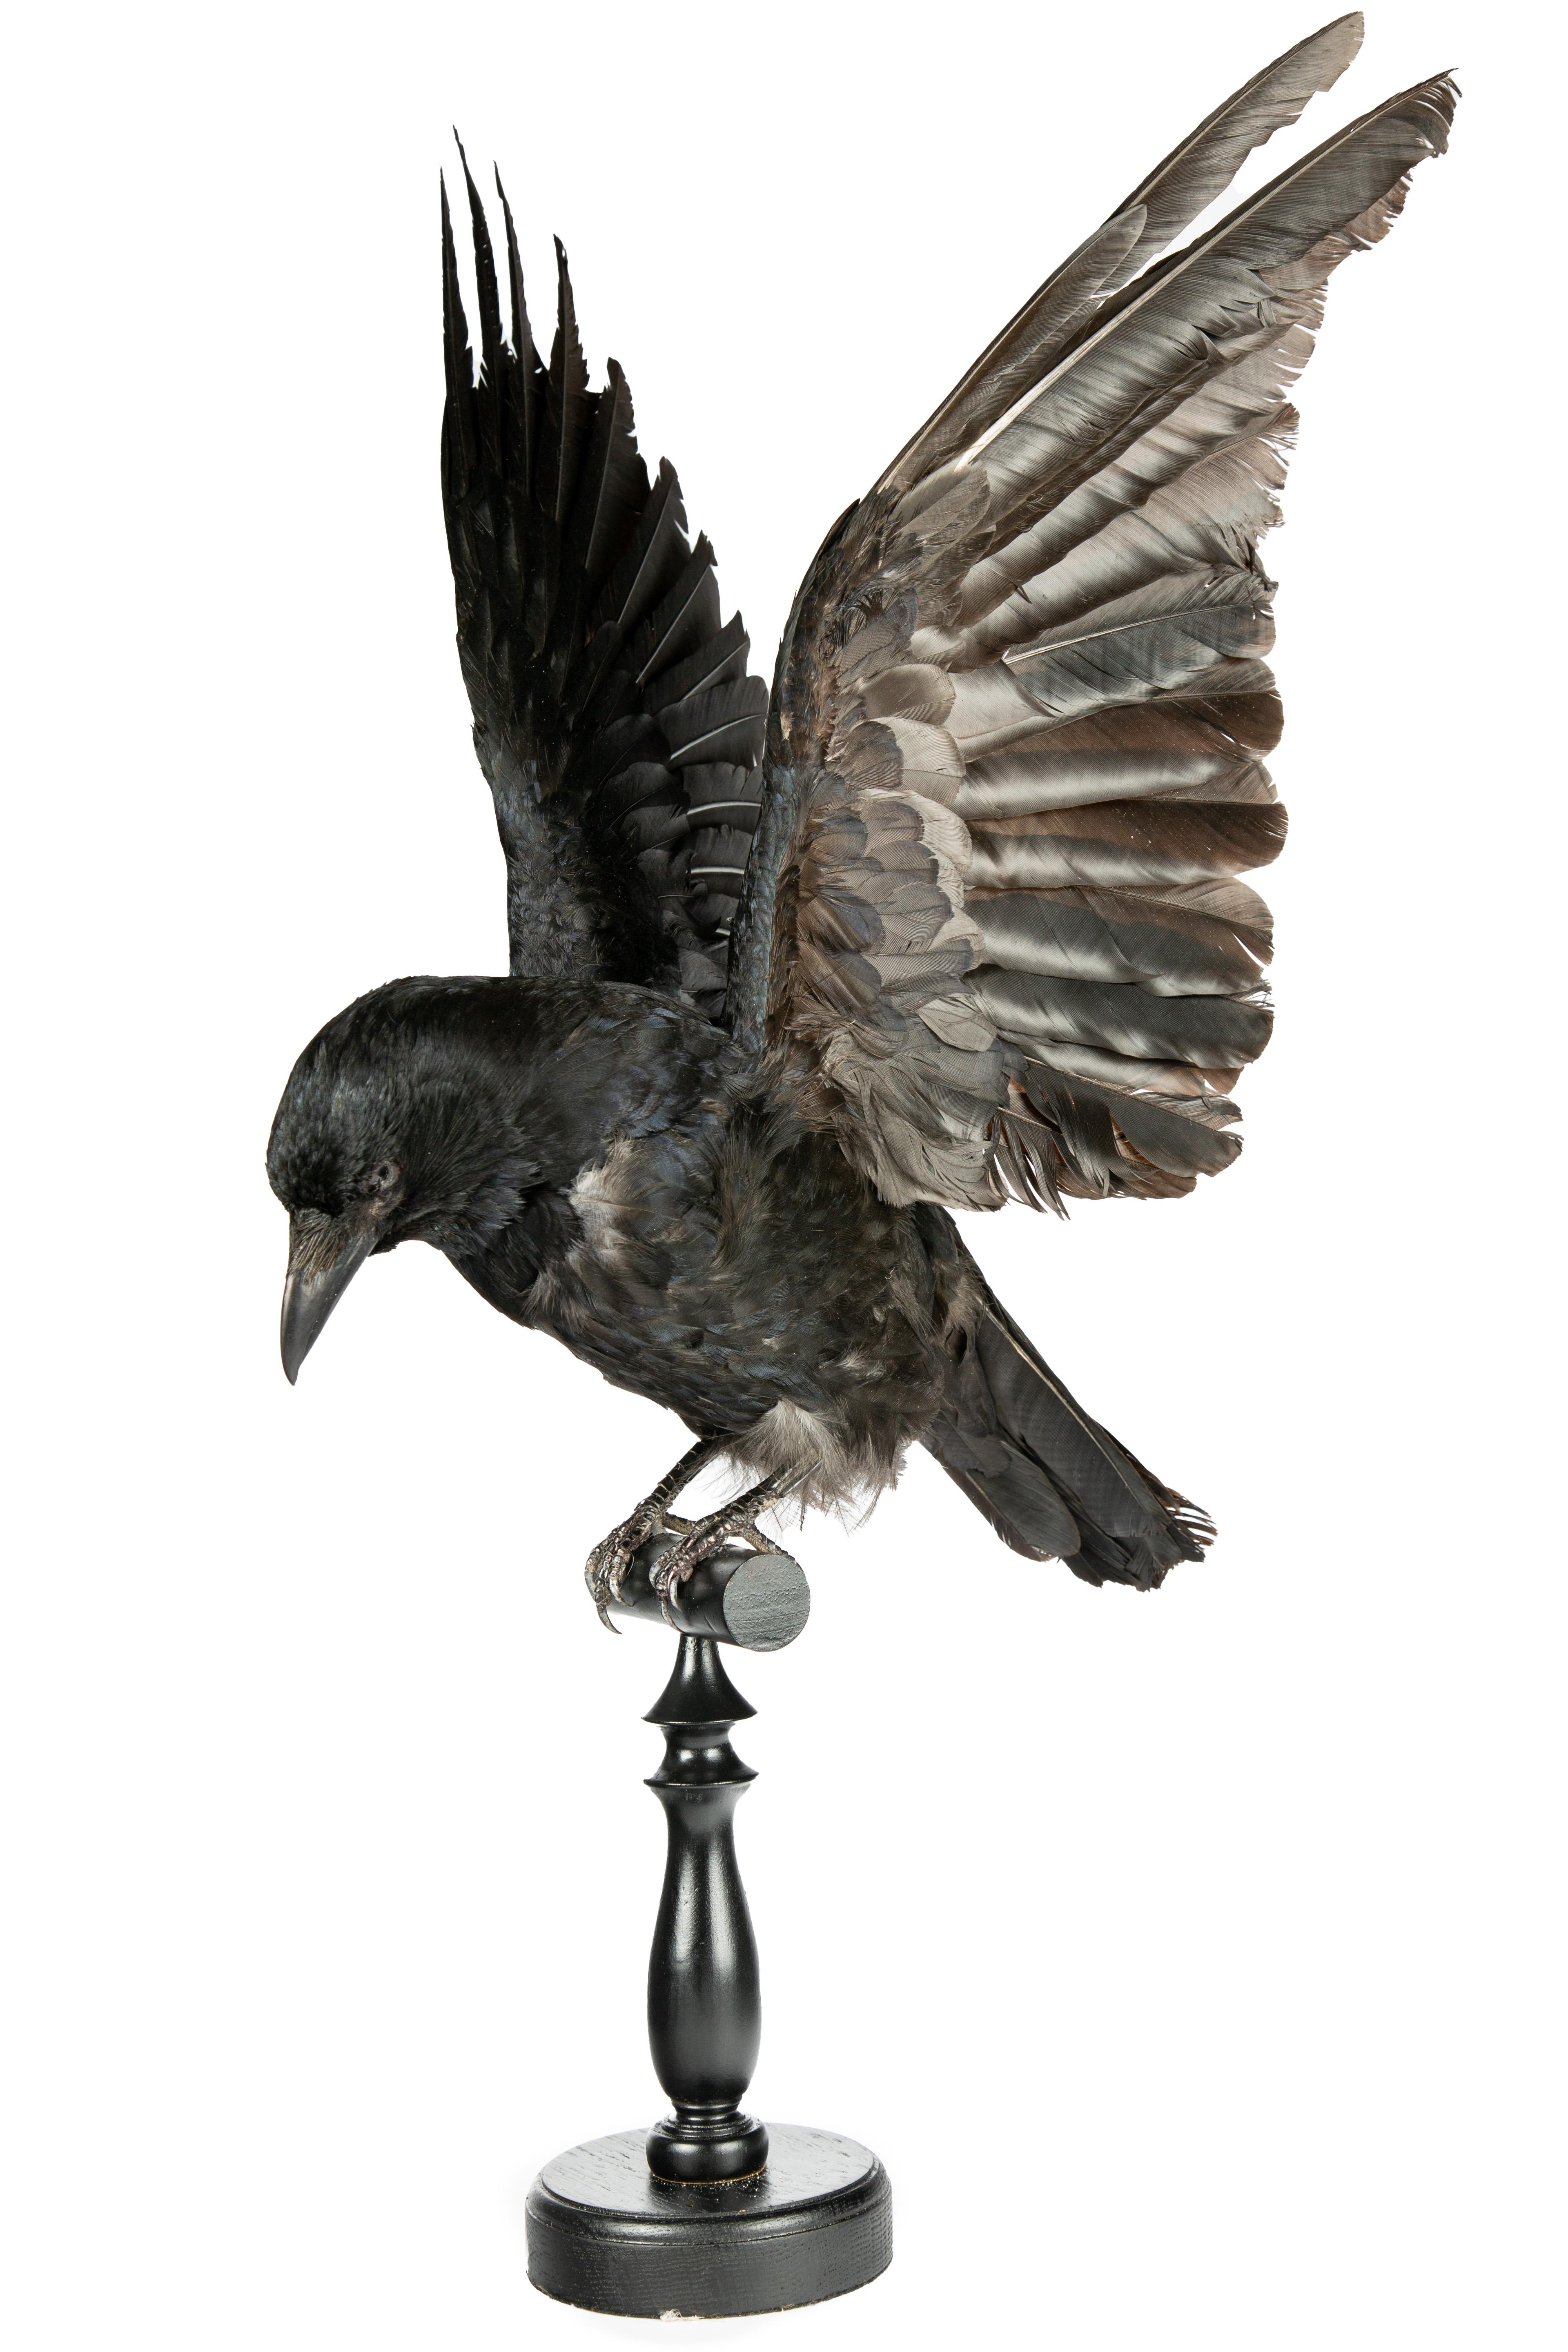 This taxidermy English Raven is a remarkable piece that captures the essence of this majestic bird. Measuring 14